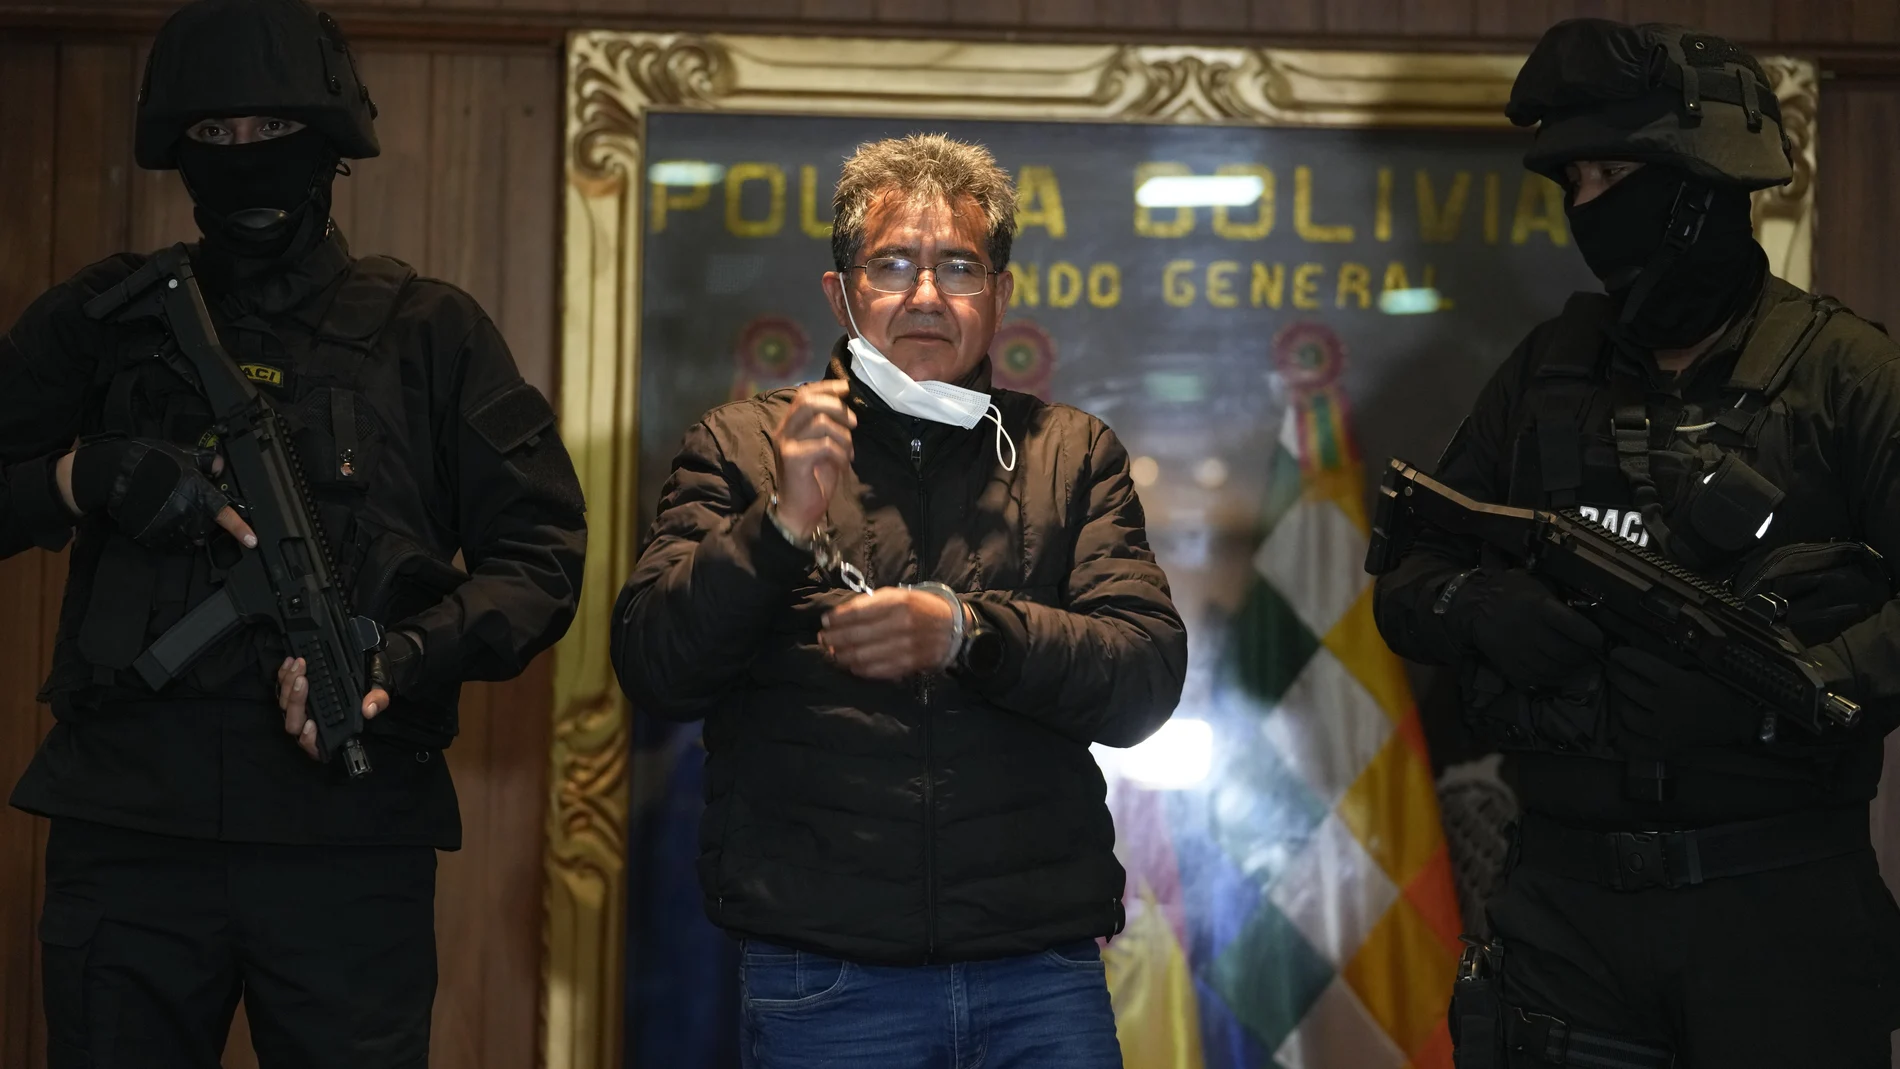 Police escort former police colonel Maximiliano Davila, center, as he was presented to the media at a Bolivian Police Command office, in La Paz, Bolivia, Sunday, Jan. 23, 2022. Authorities announced the capture of Colonel Davila, the former anti-drug director of the Bolivian police, for being tied to a wide drug trafficking ring. (AP Photo/Juan Karita)